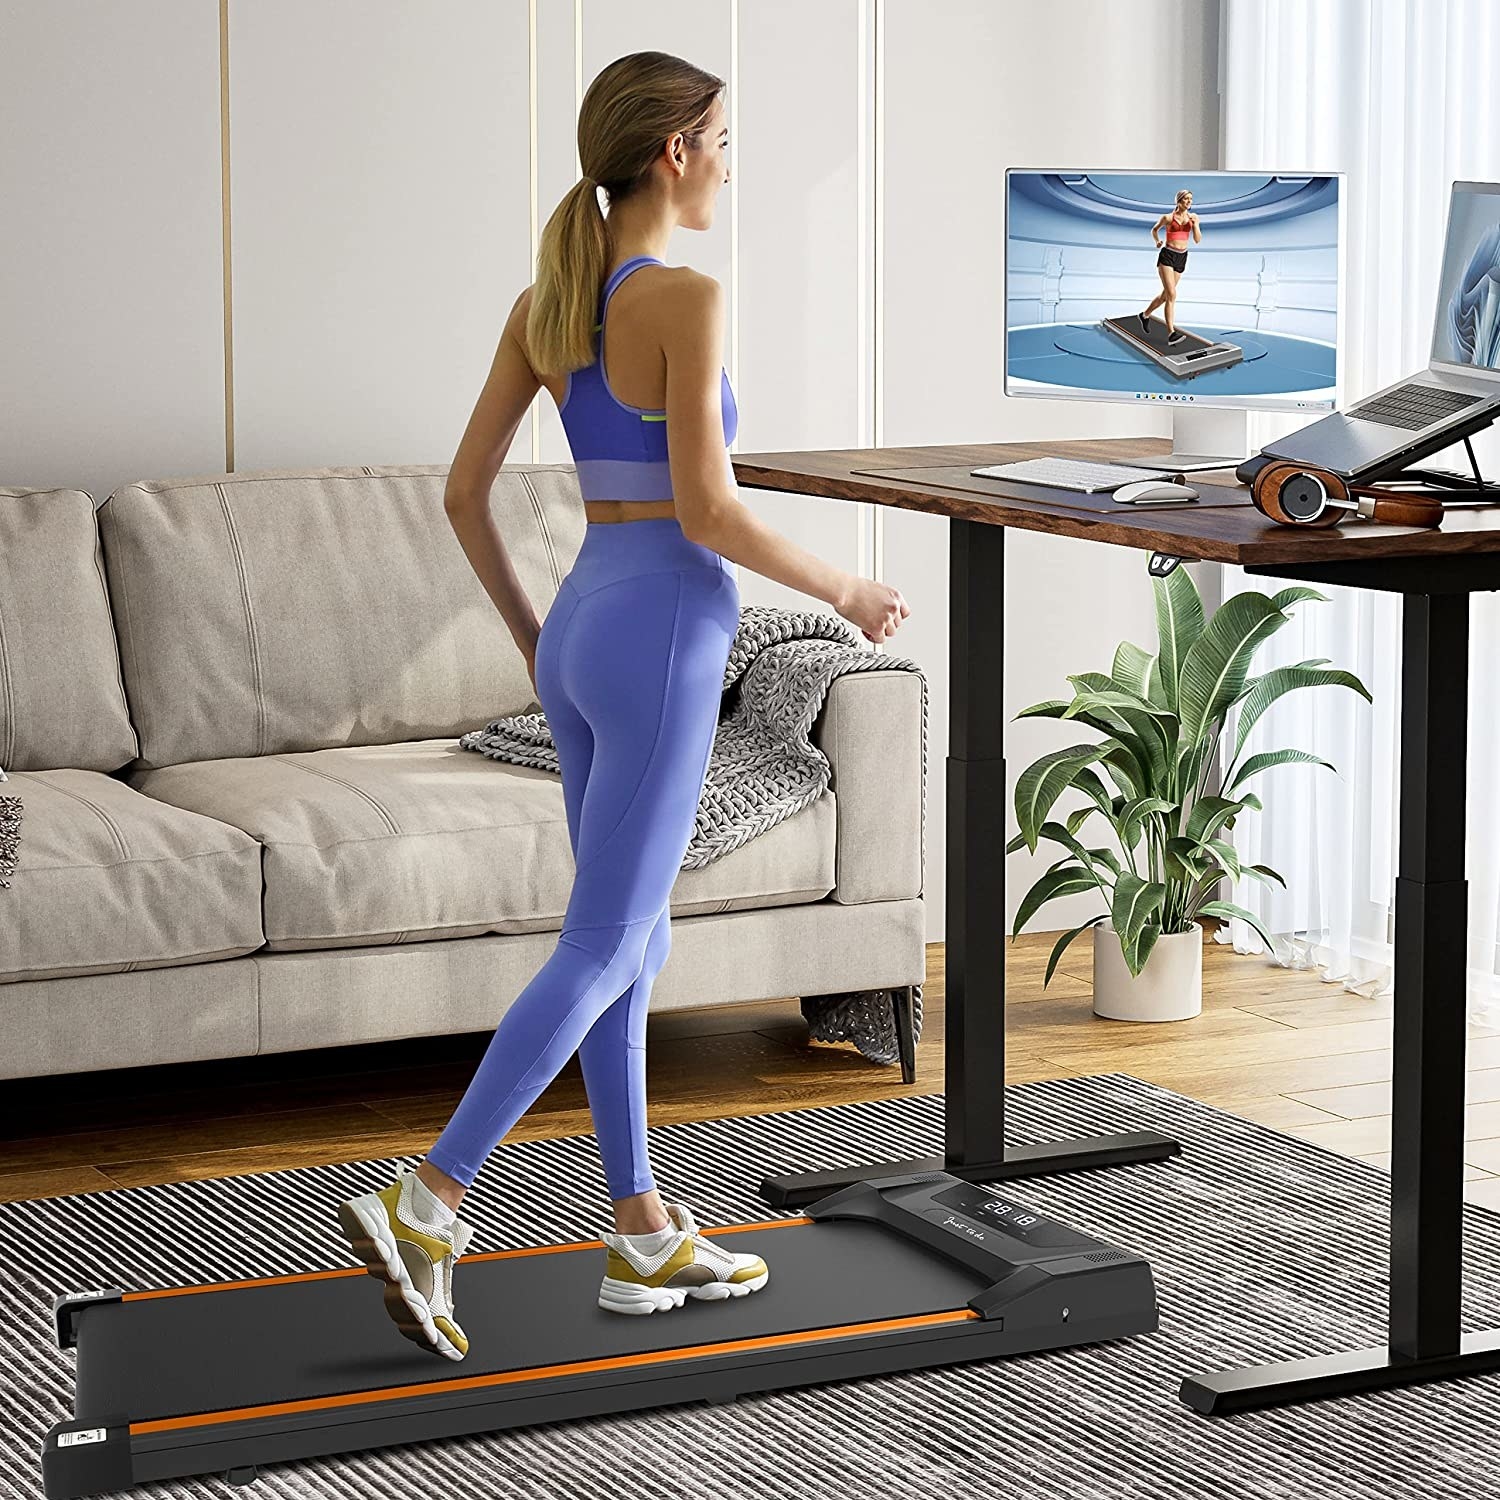 a person using the treadmill while looking a computer